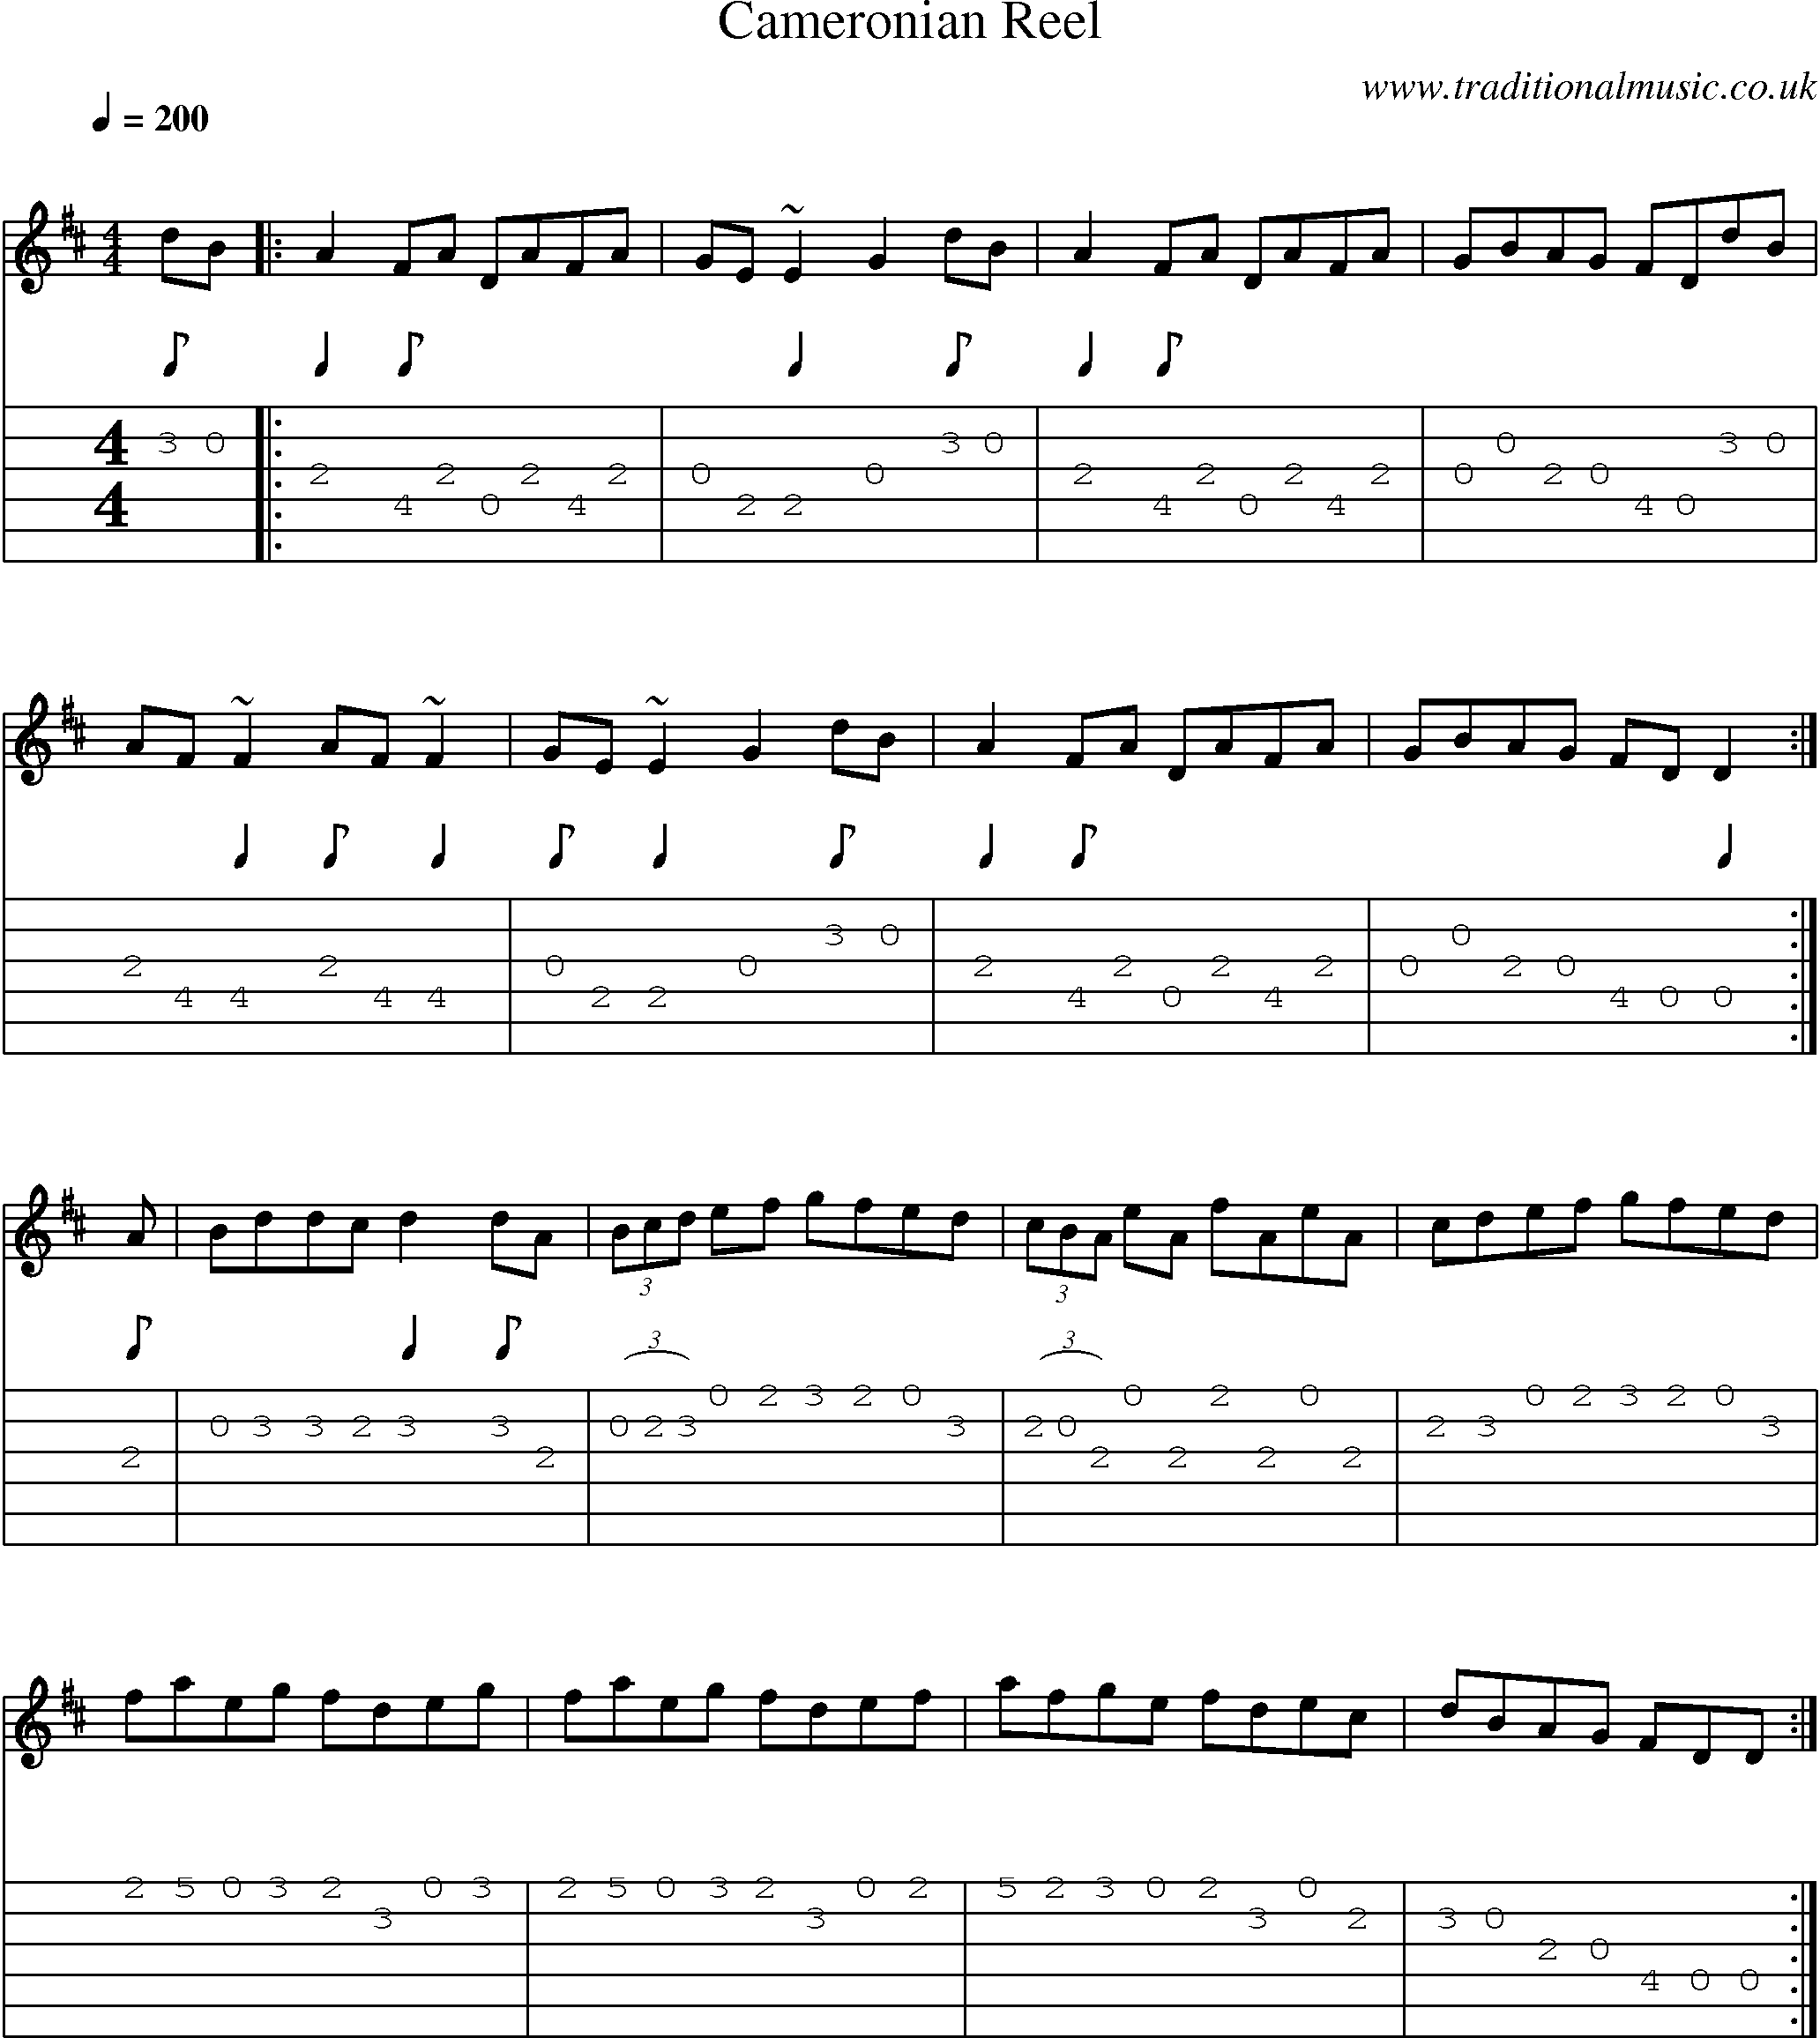 Music Score and Guitar Tabs for Cameronian Reel